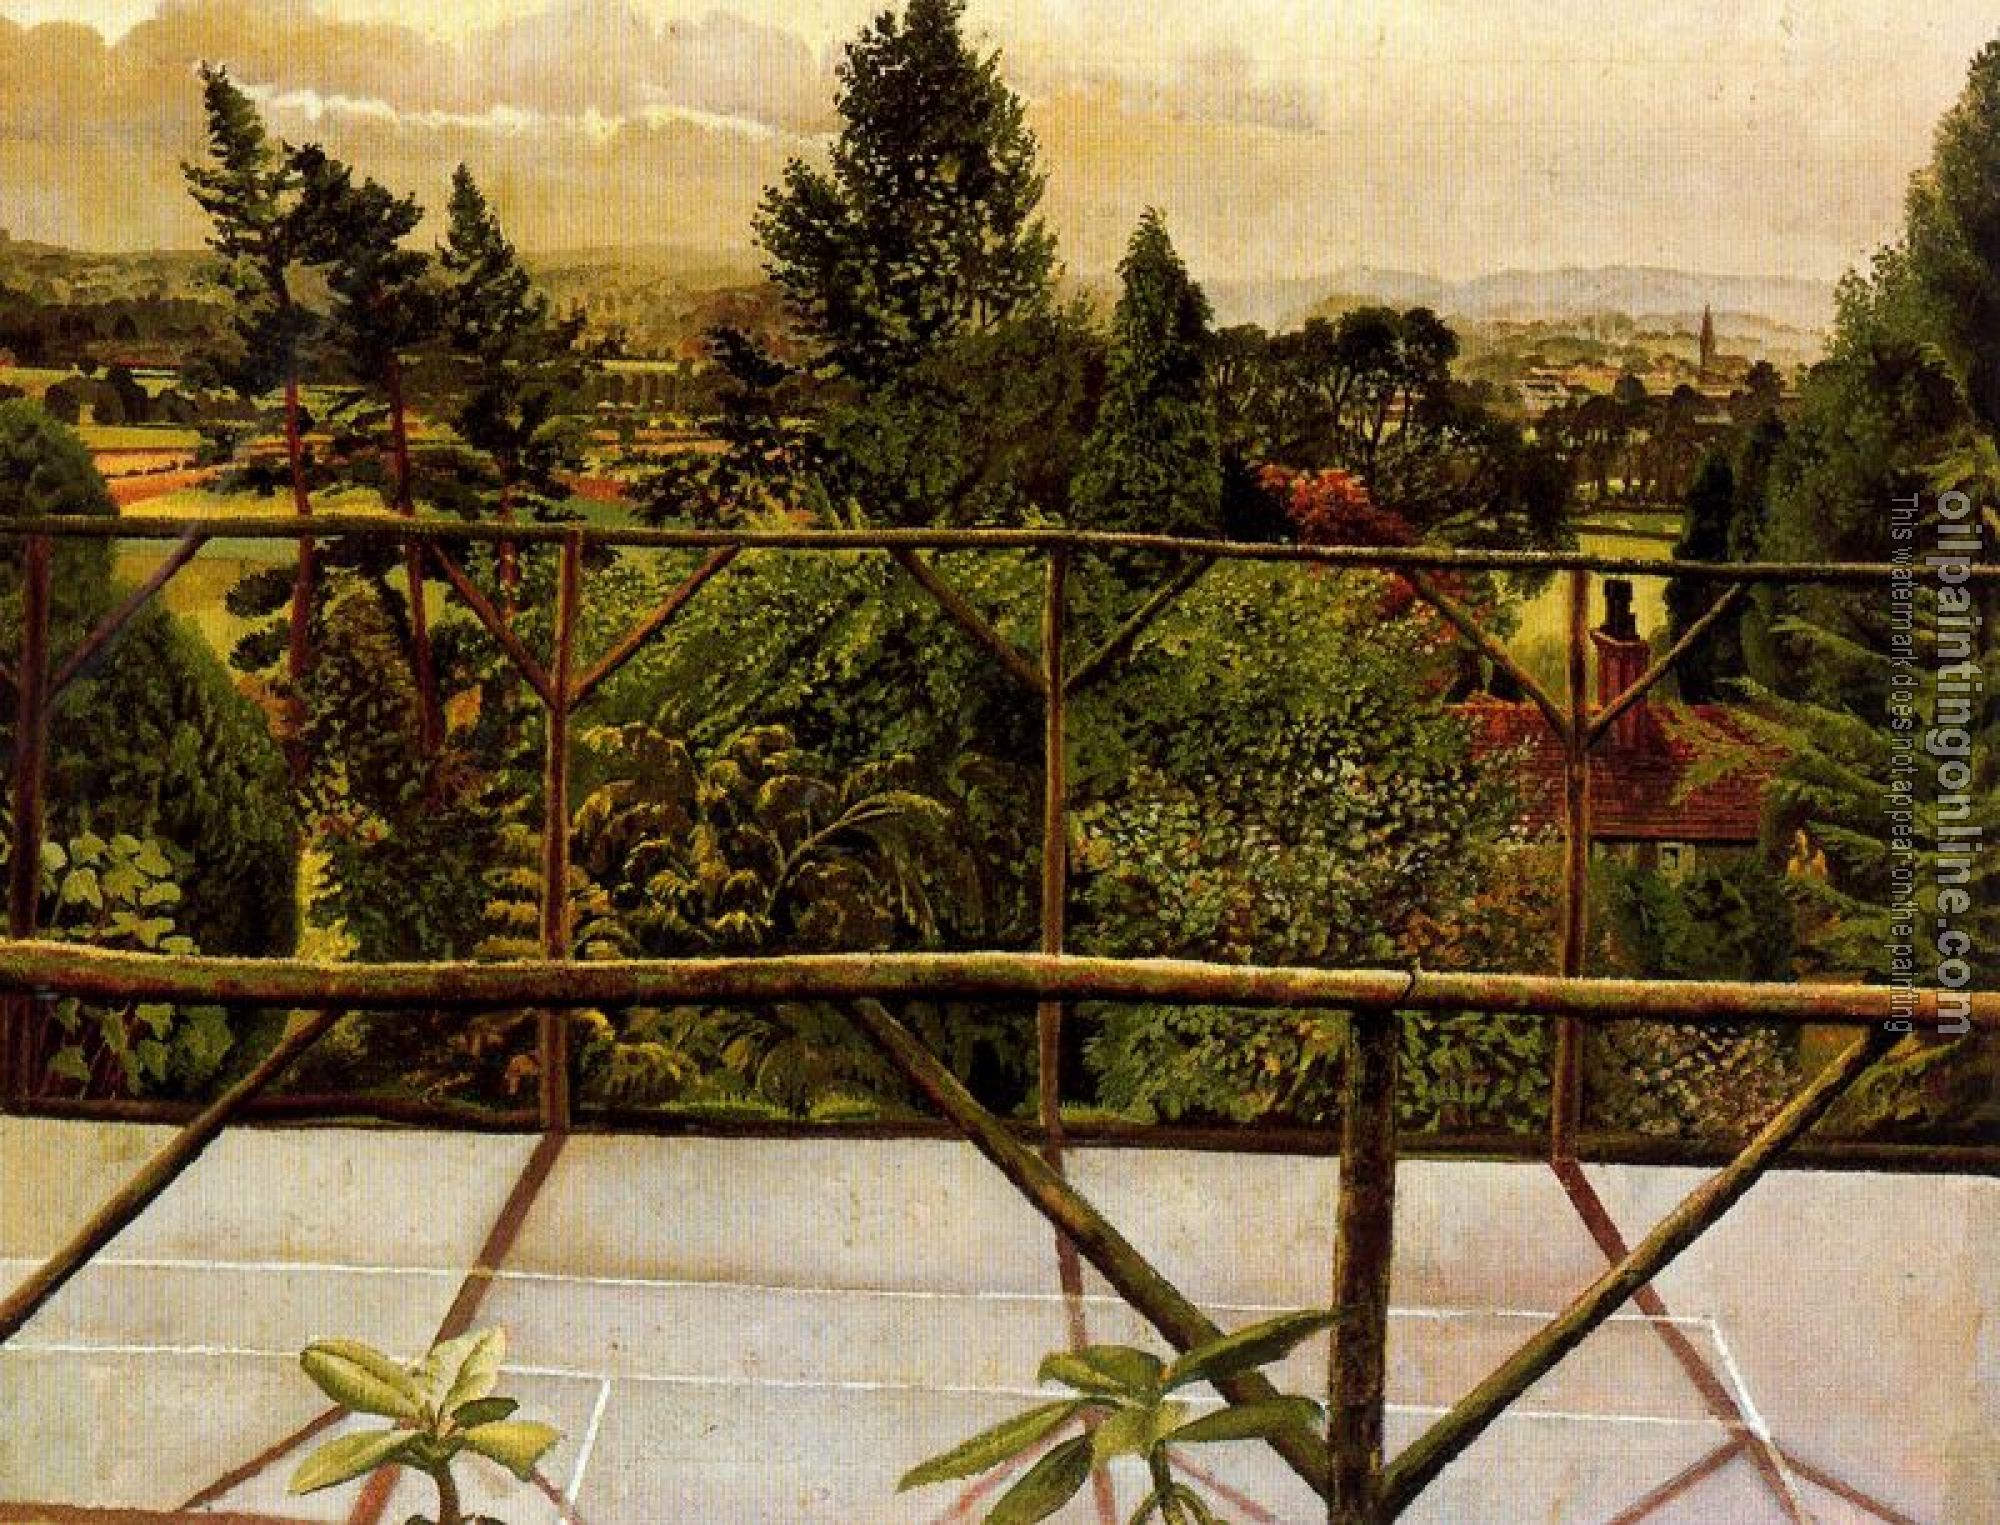 Stanley Spencer - View From the Tennis Court, Cookham